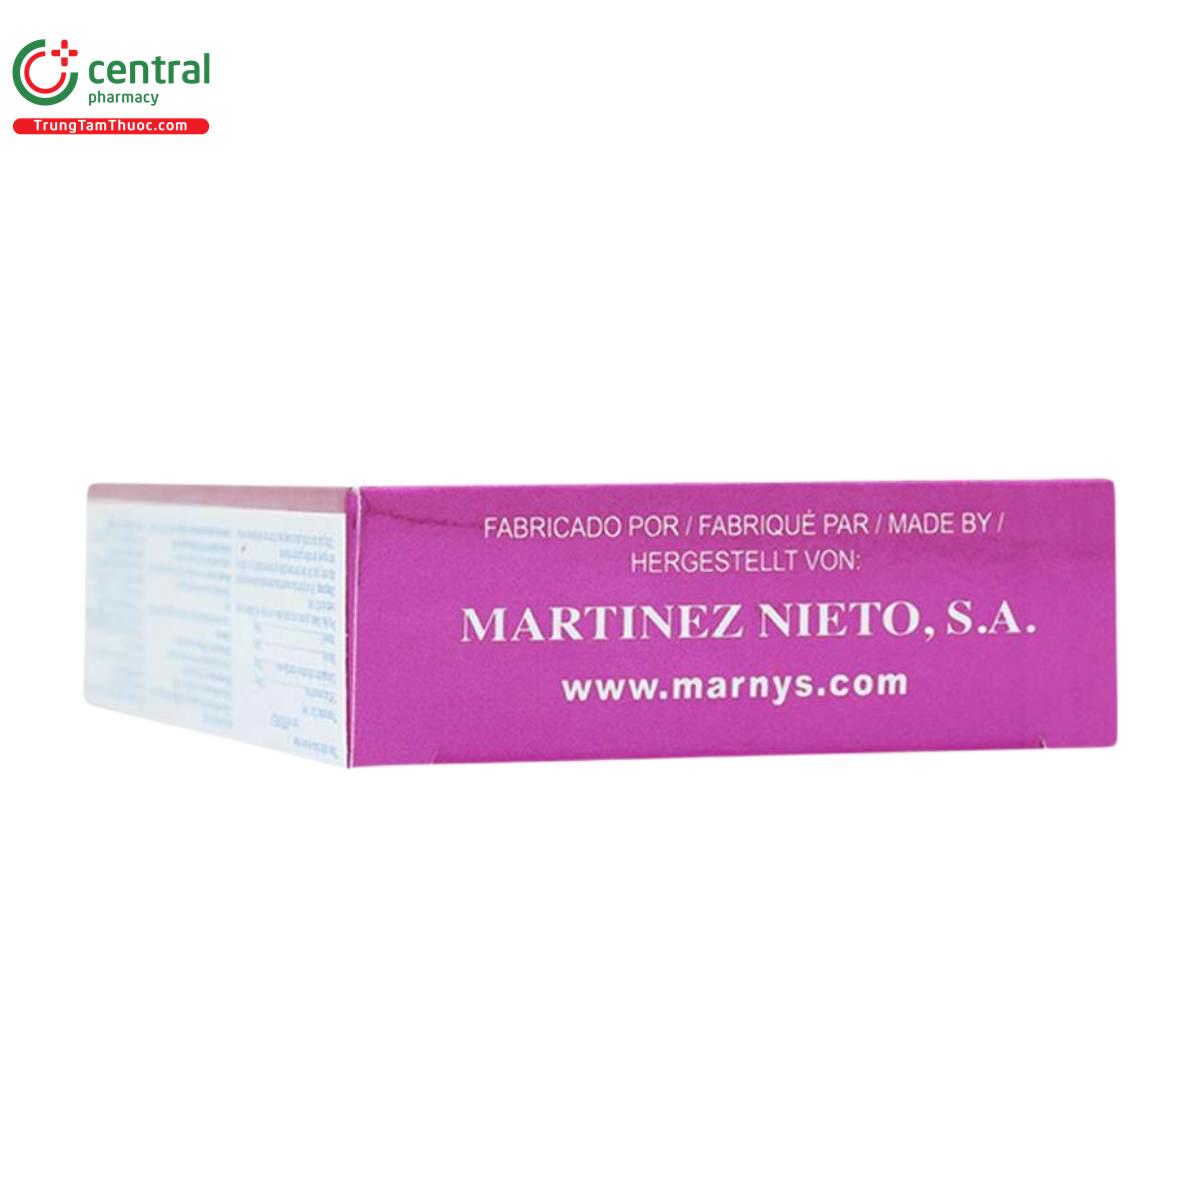 marnys fitohelp 5 D1780